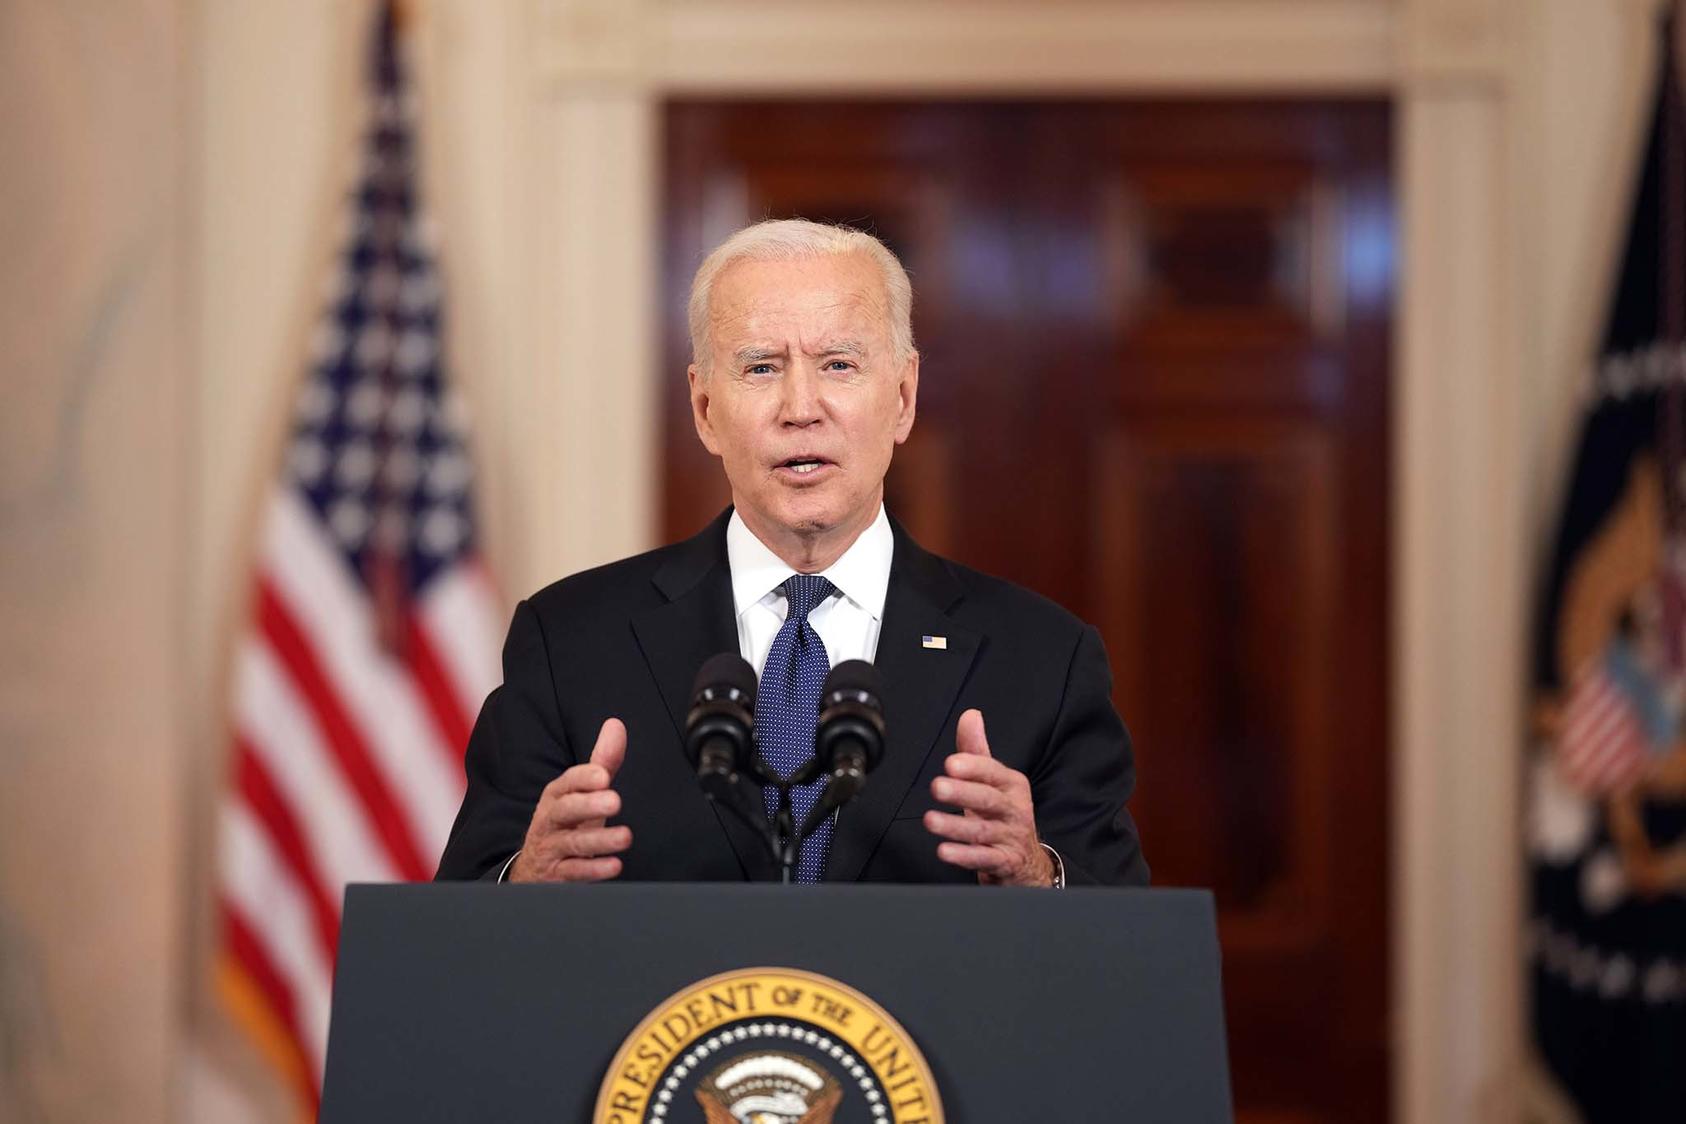 President Joe Biden speaks at the White House in Washington on Thursday, May 20, 2021, about the cease-fire agreement between Israel and Hamas after more than 10 days of fighting. (Doug Mills/The New York Times)